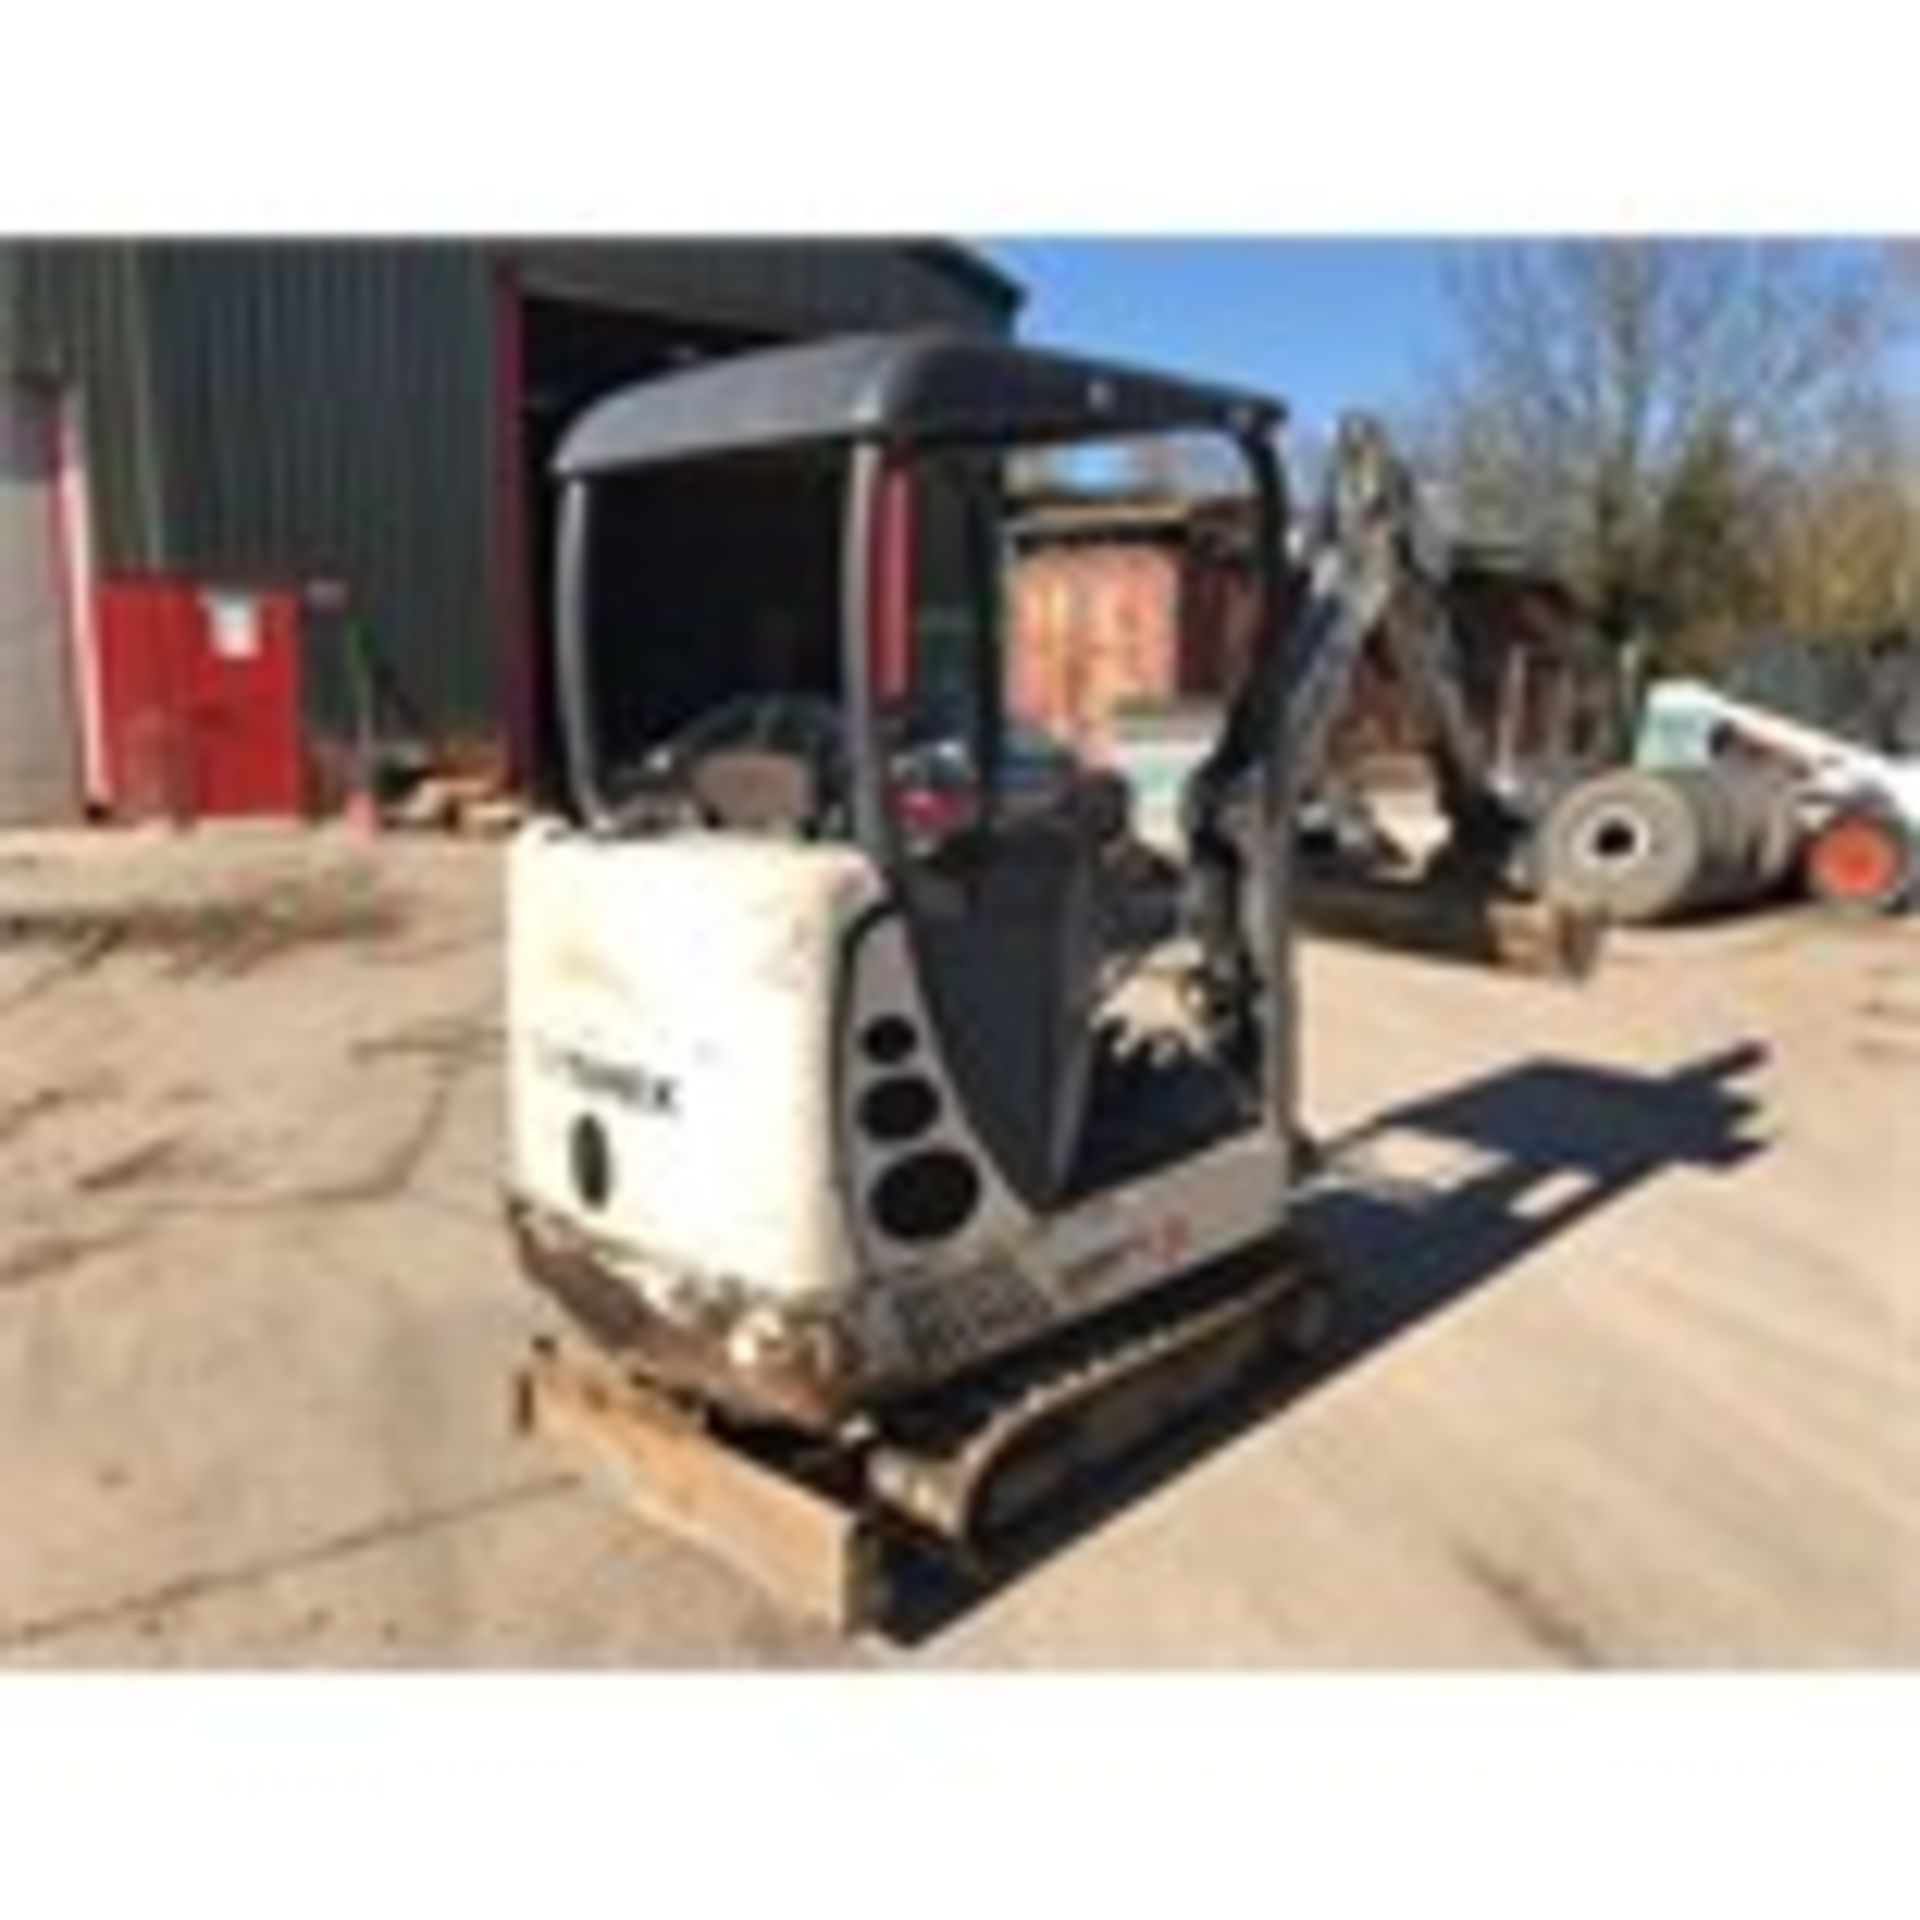 TEREX HR 1.5 MINI DIGGER WITH GRAB & HAMMER CONNECTIONS - 2005 (+VAT) - Image 4 of 14